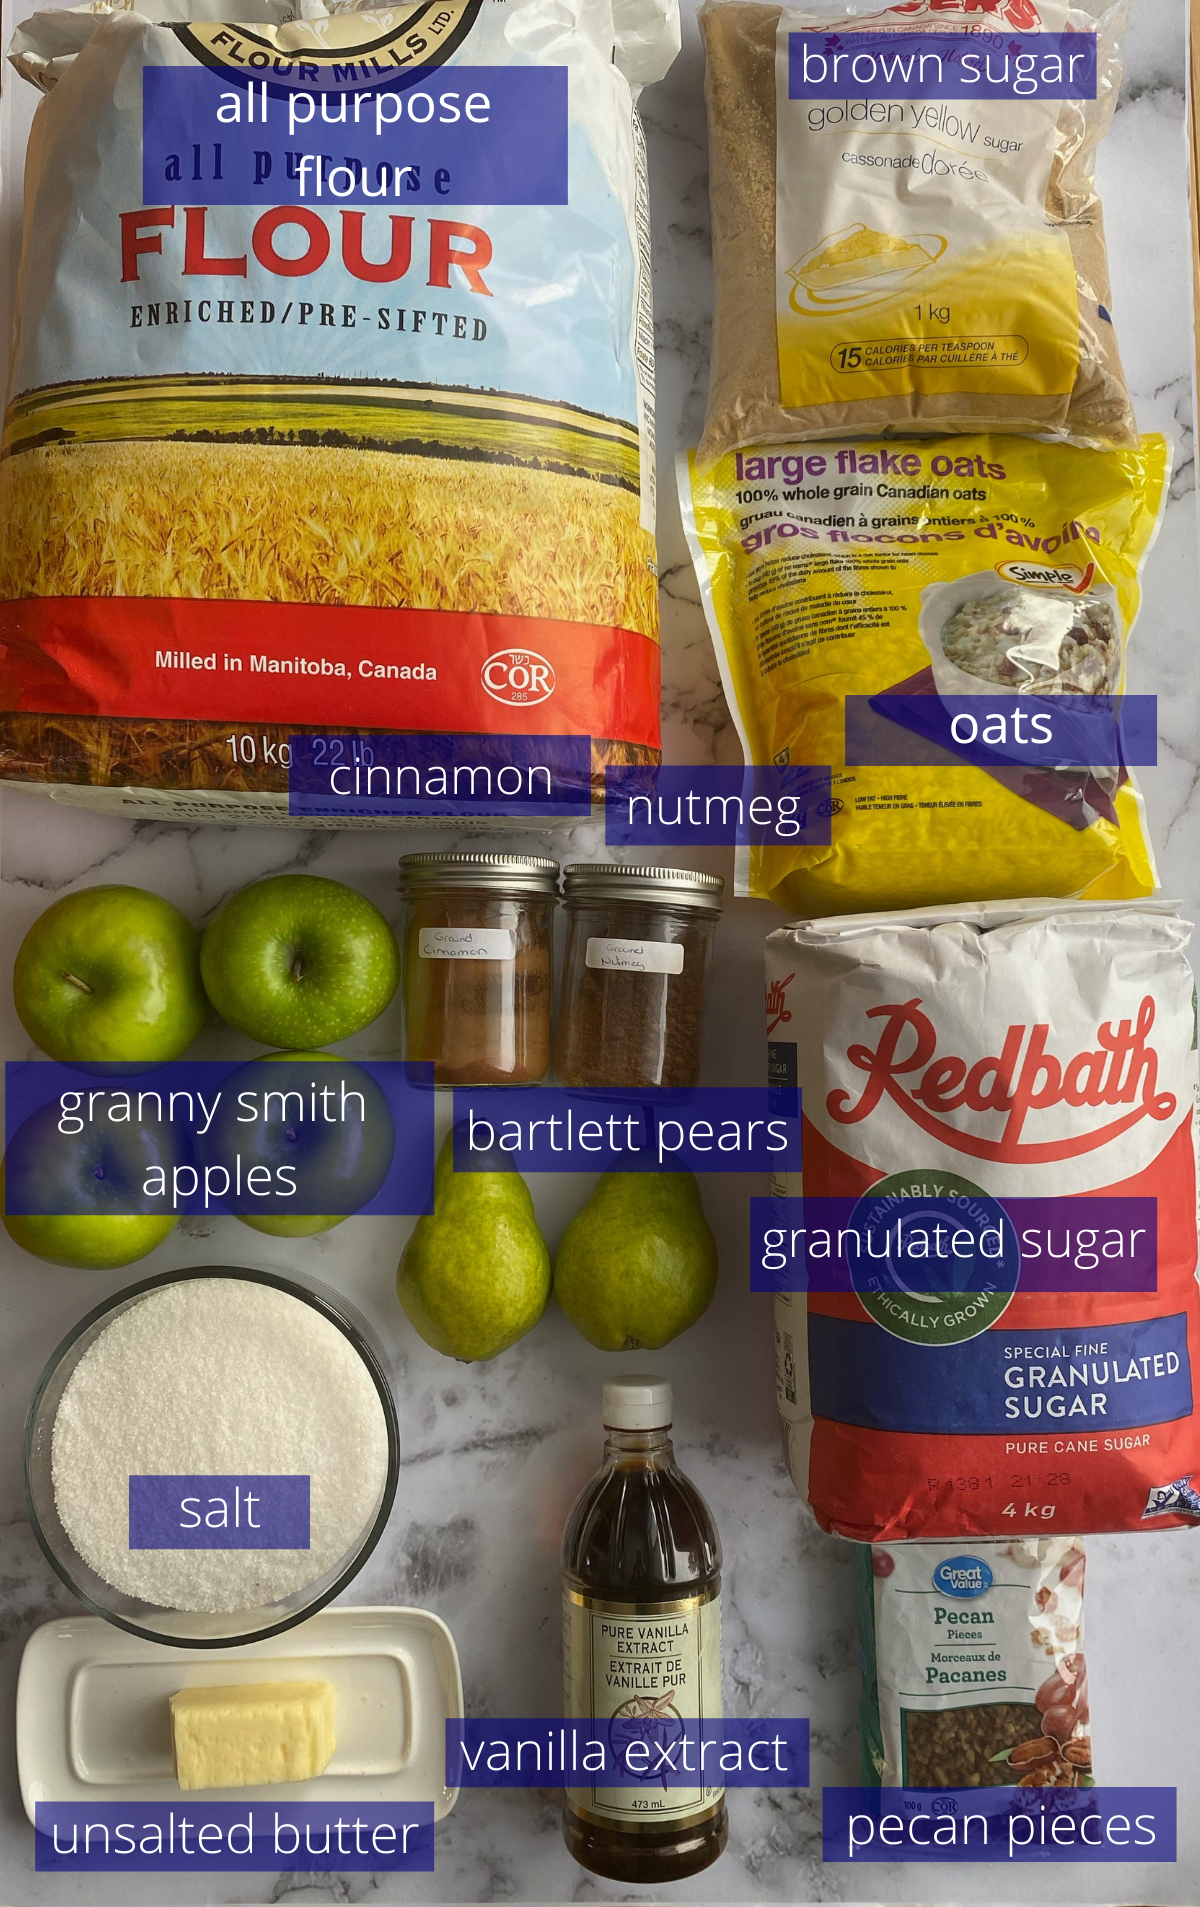 A picture of all the ingredients needed for this recipe.